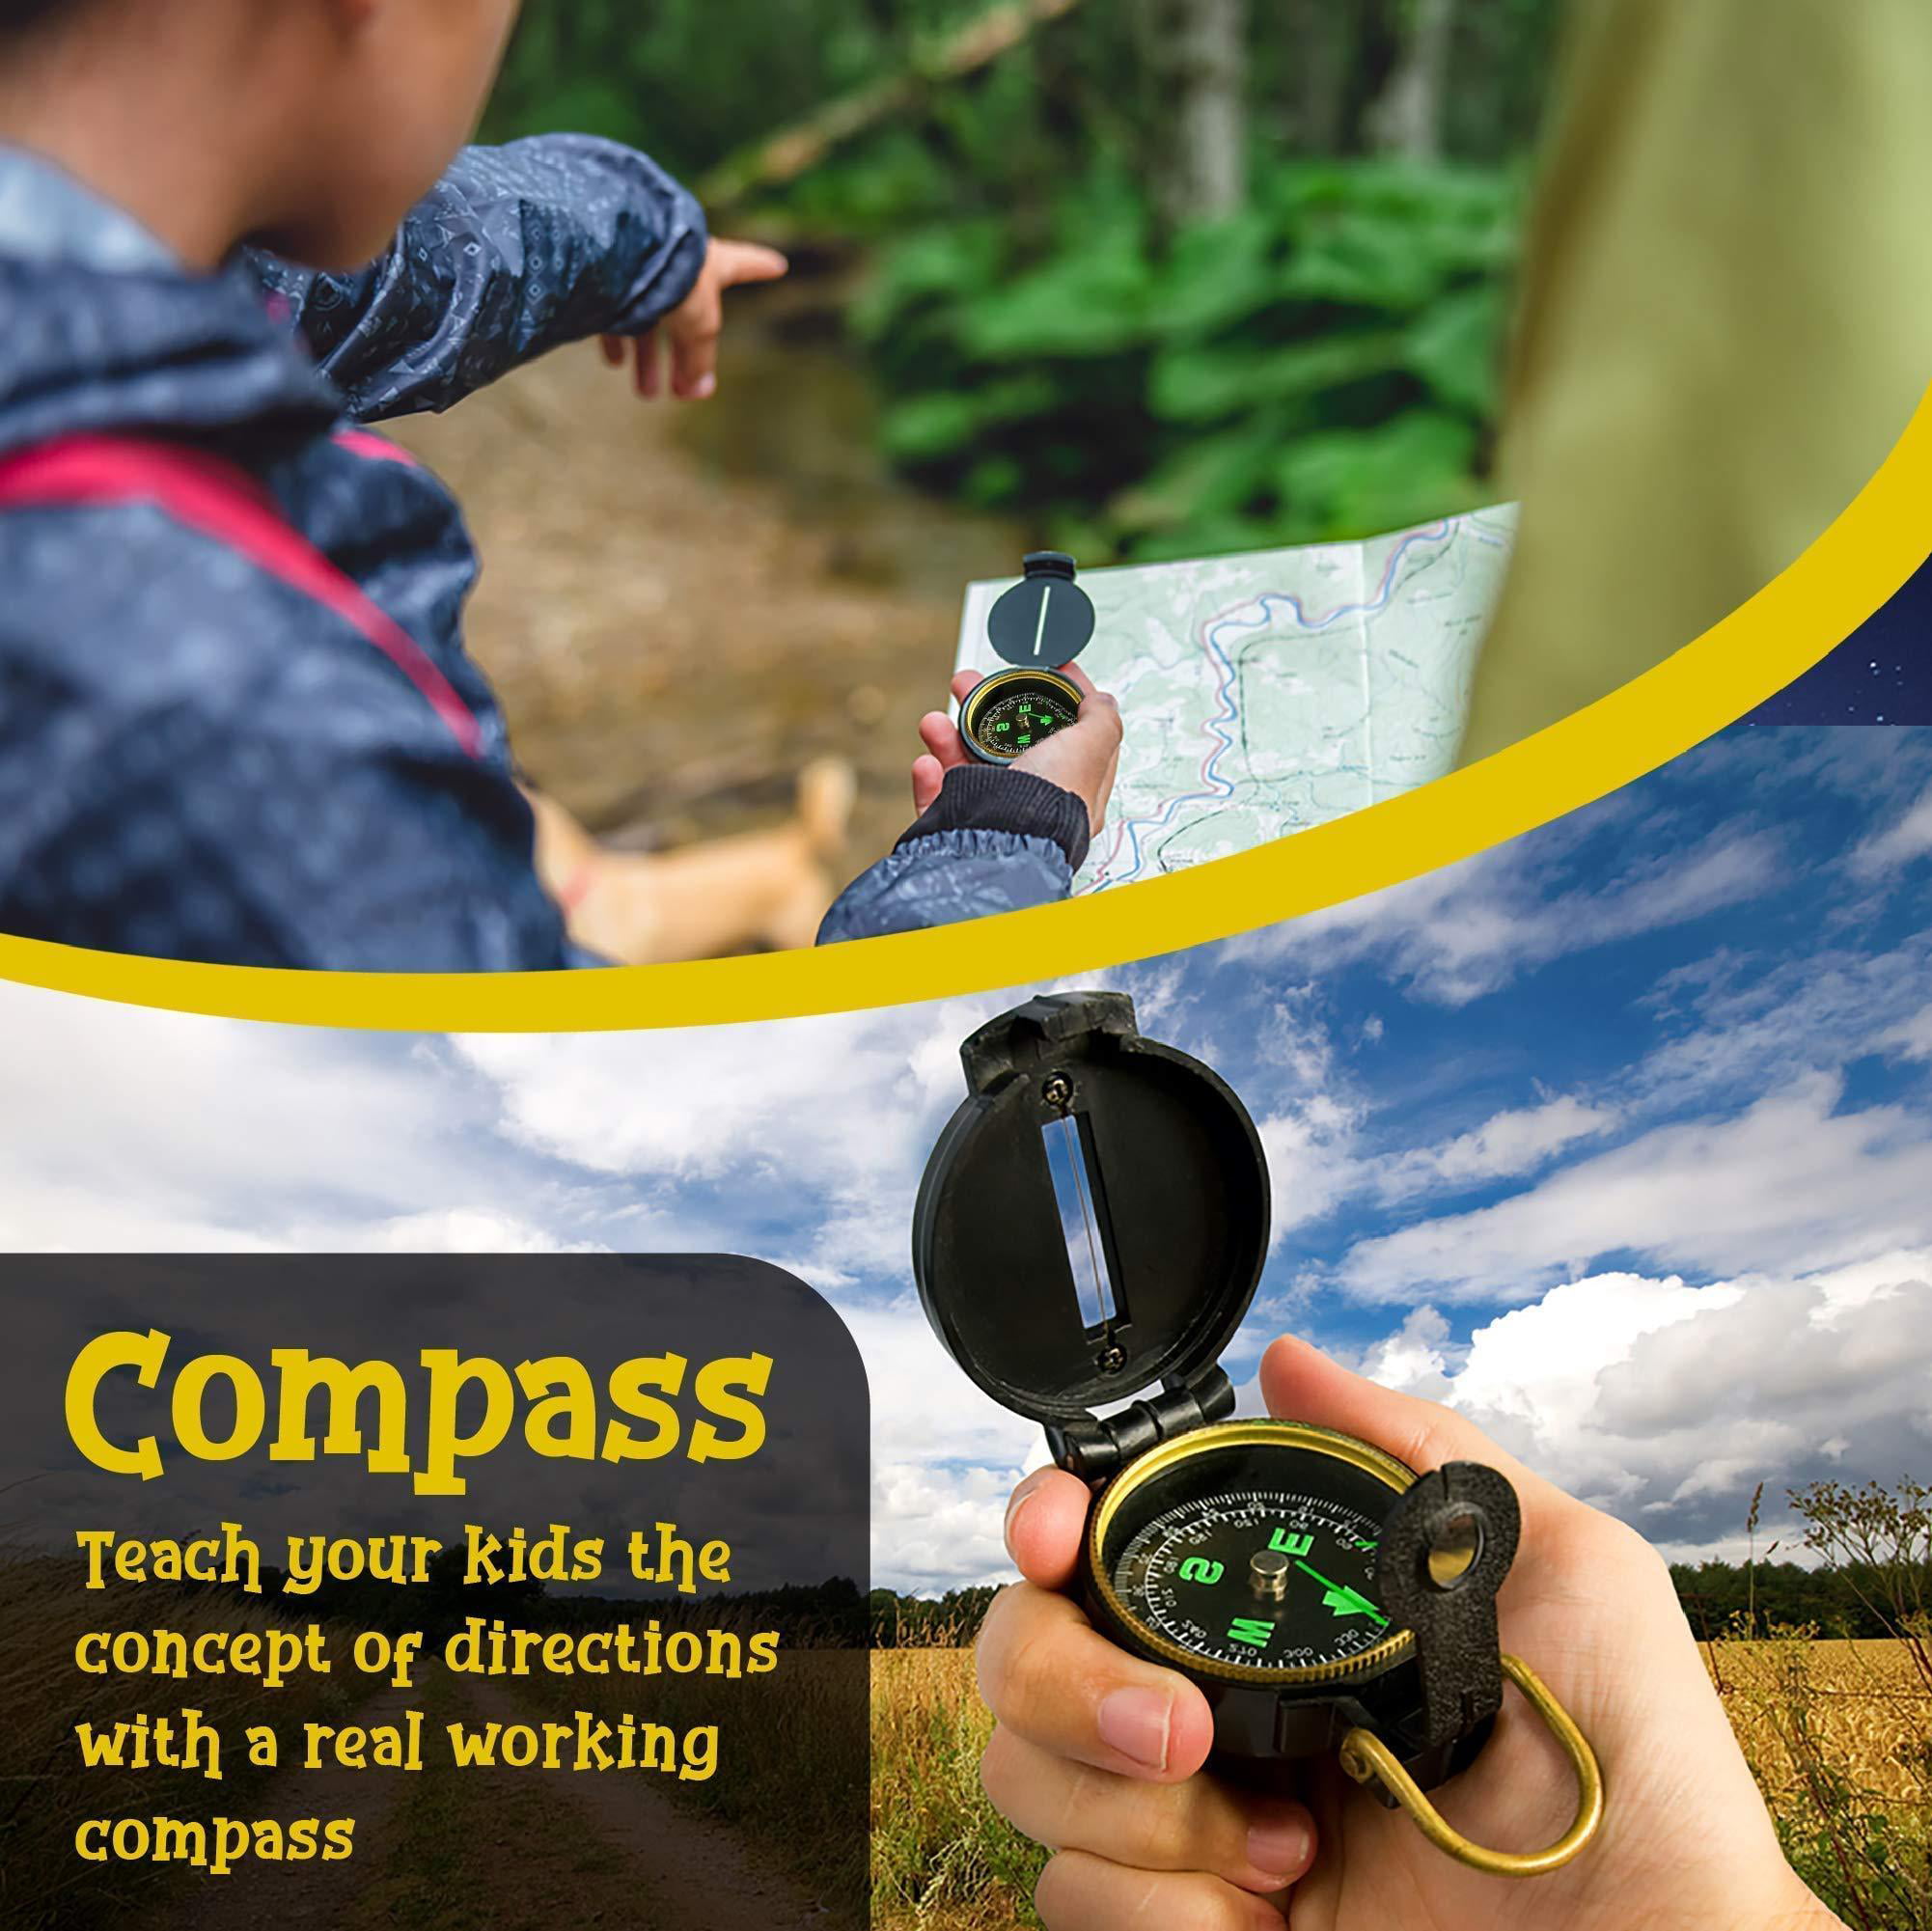 Explorer Kit for Kids Compass Include Binoculars Camping Magnifying Glass and Backpack 10Pcs Children Kids Outdoor Exploration Educational Toys for Hiking 